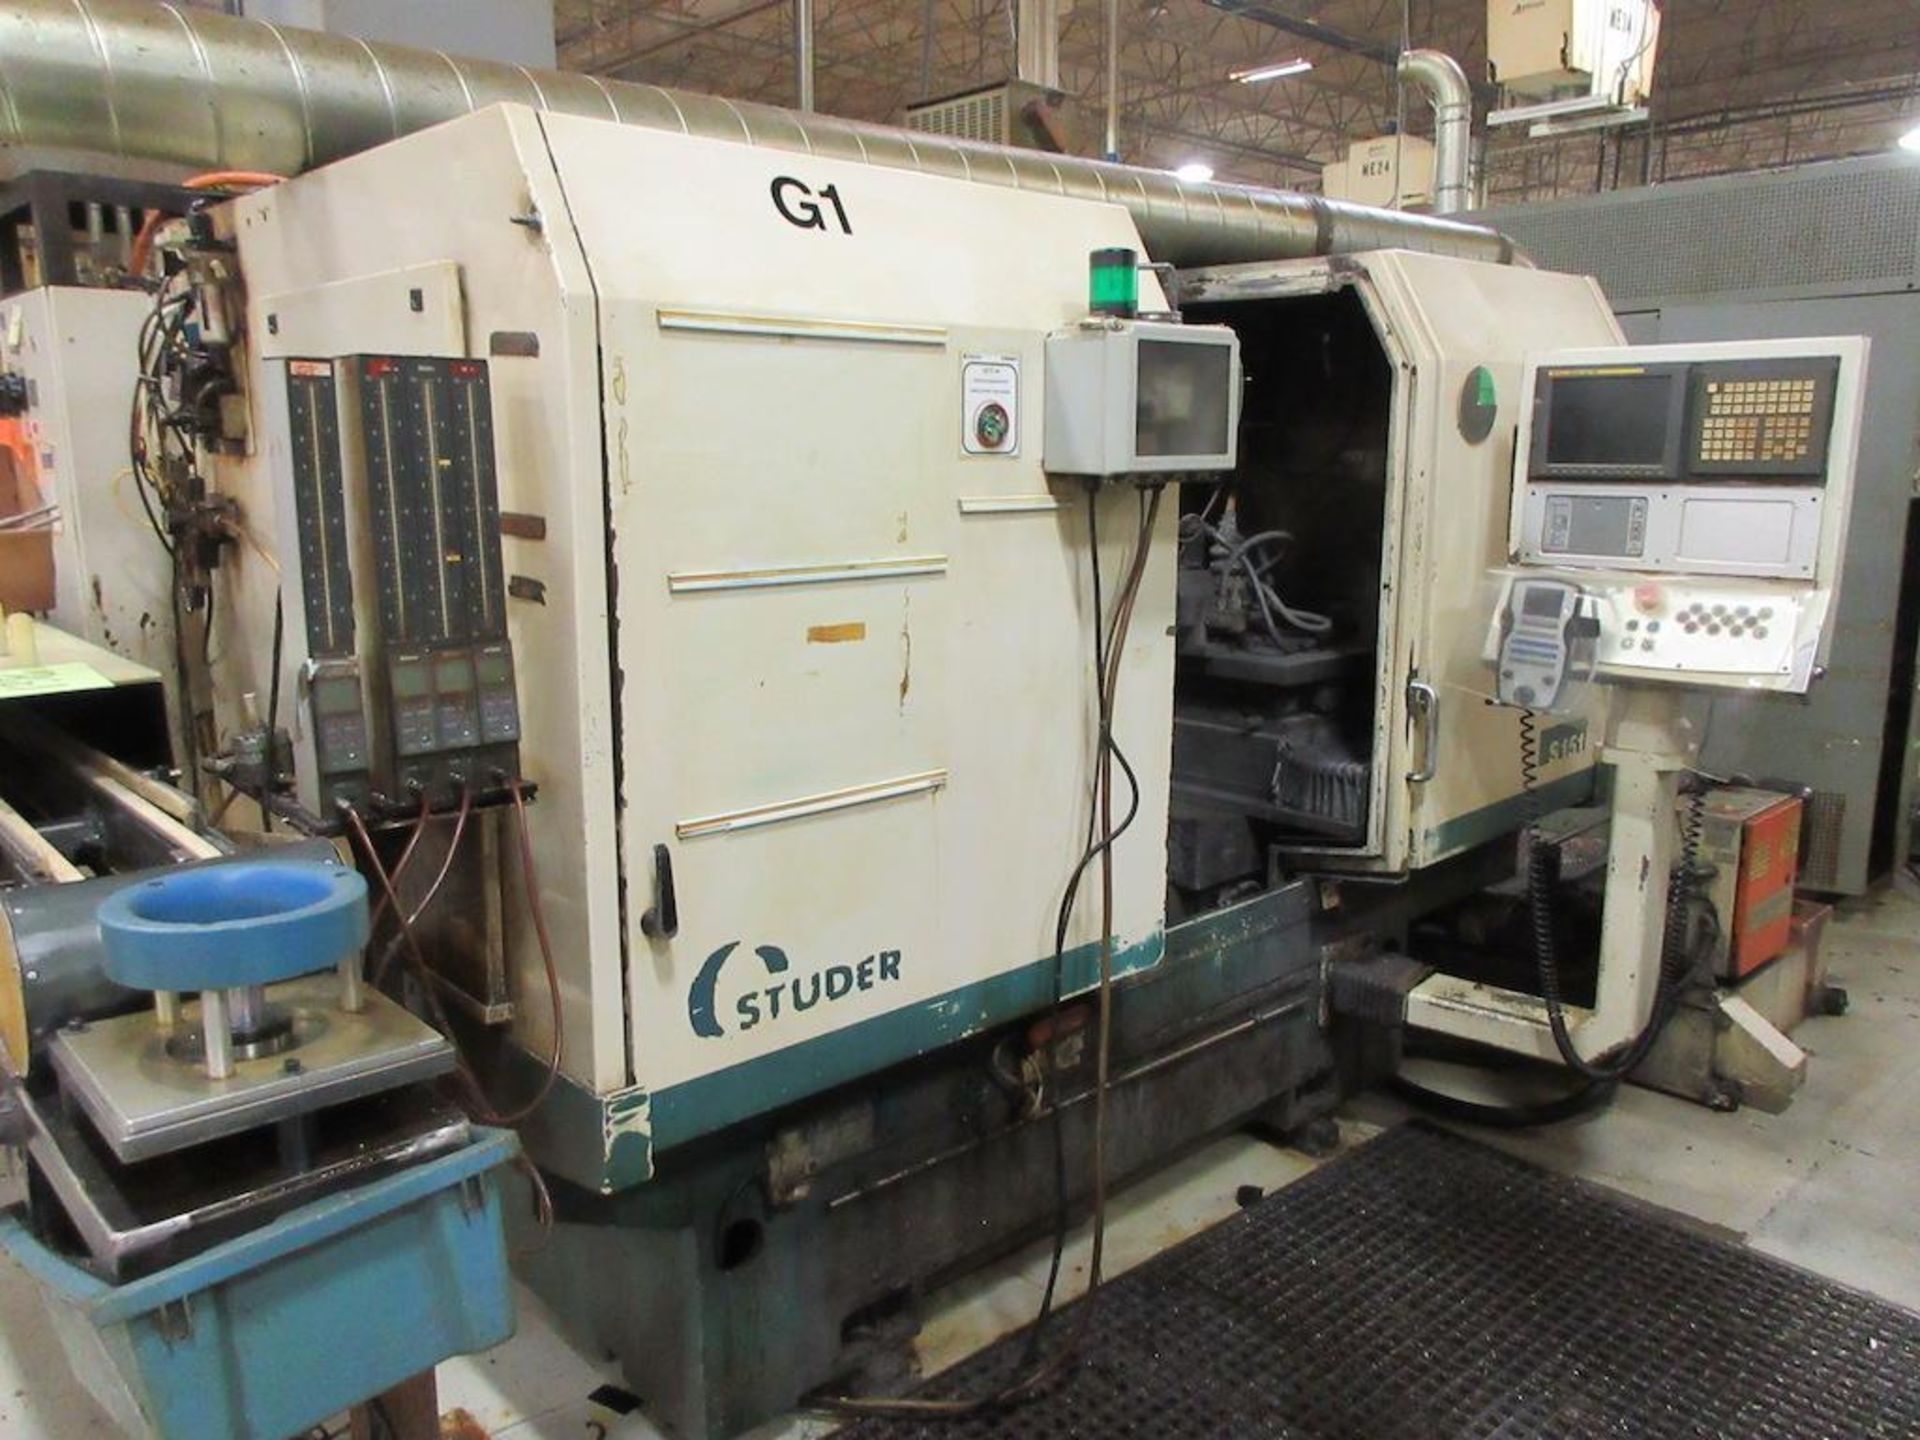 2006 STUDER, CNC Grinders, Model S151, High Frequency Drive Spindle, Swing diameter 14.17", center